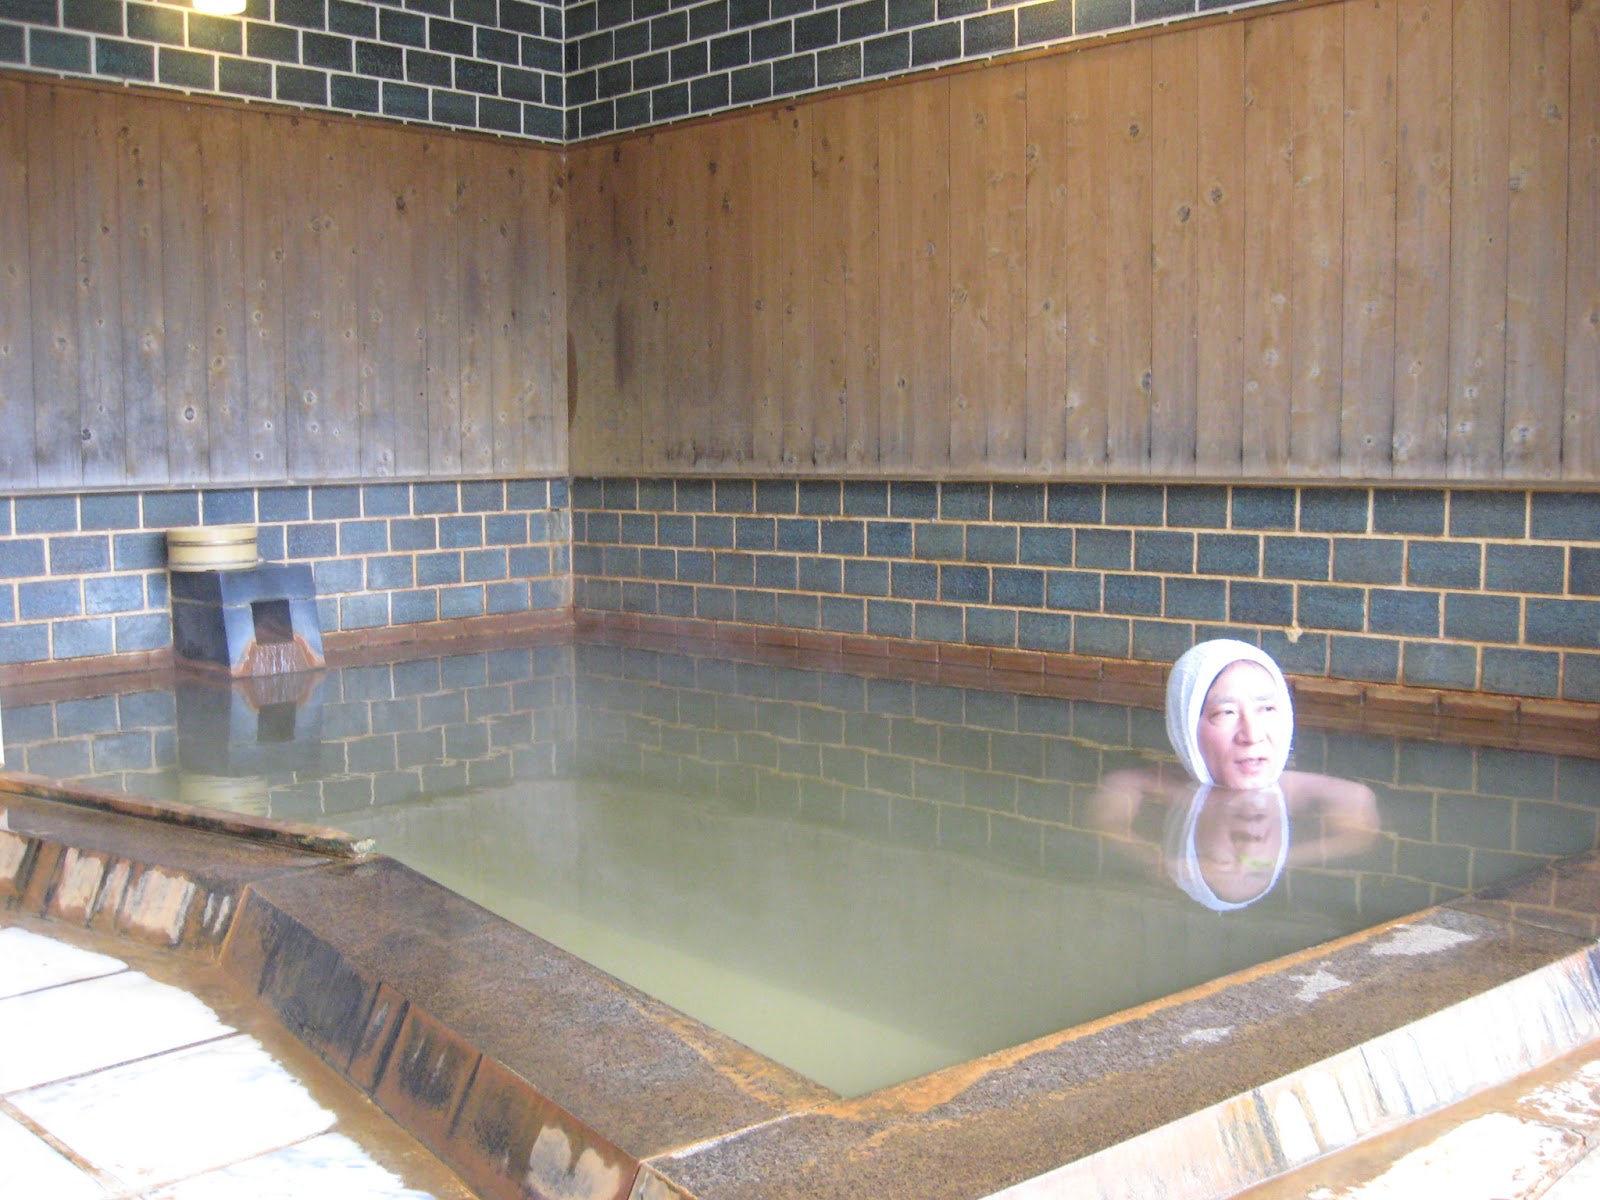 Article Introducing Onsen Culture - info hot spring